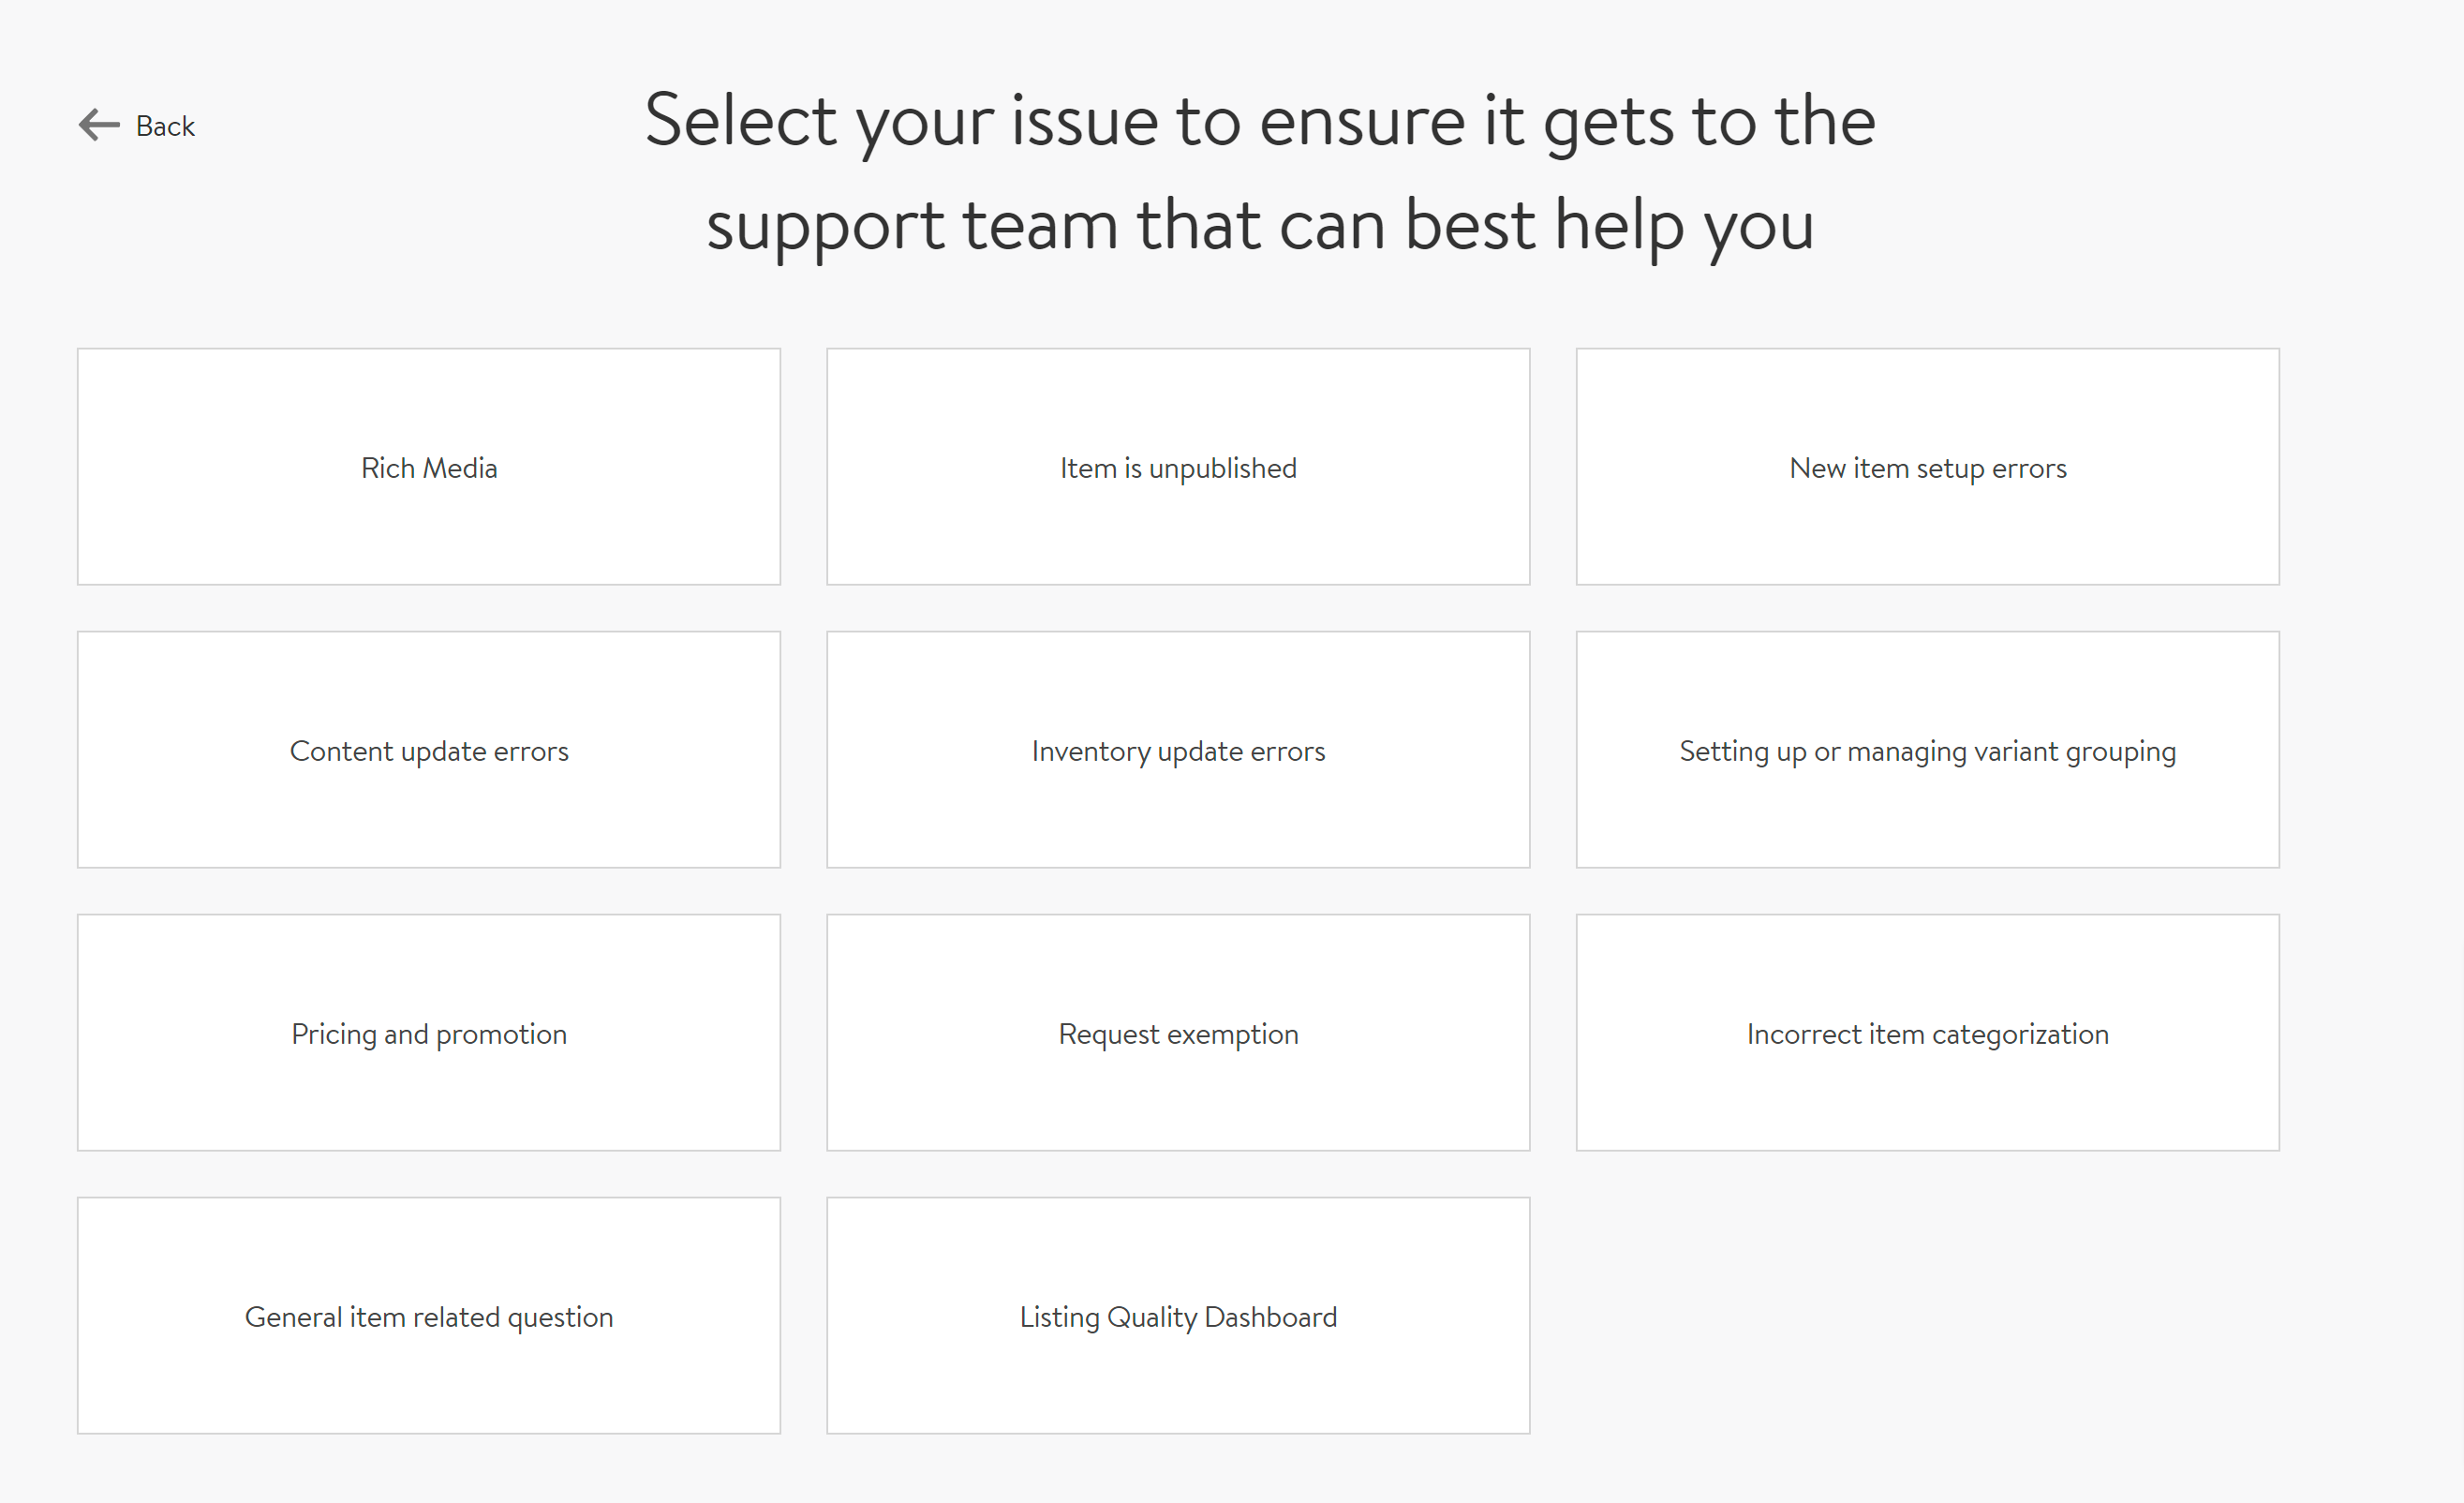 select your issue to ensure it gets to the support team that can best help you